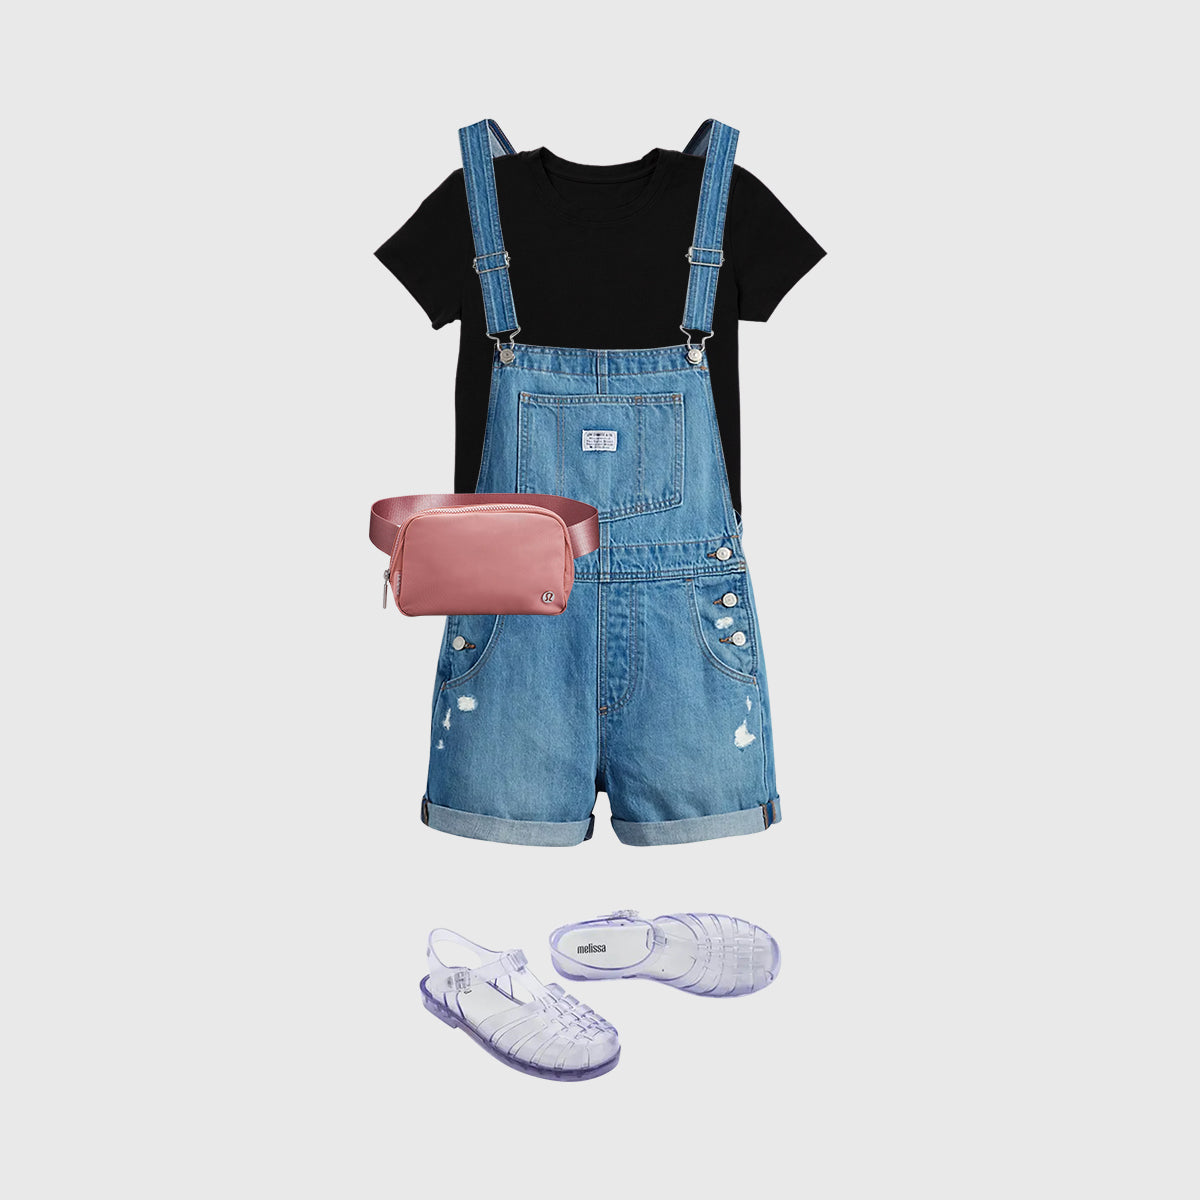 Overall Amazing T-Shirt Look